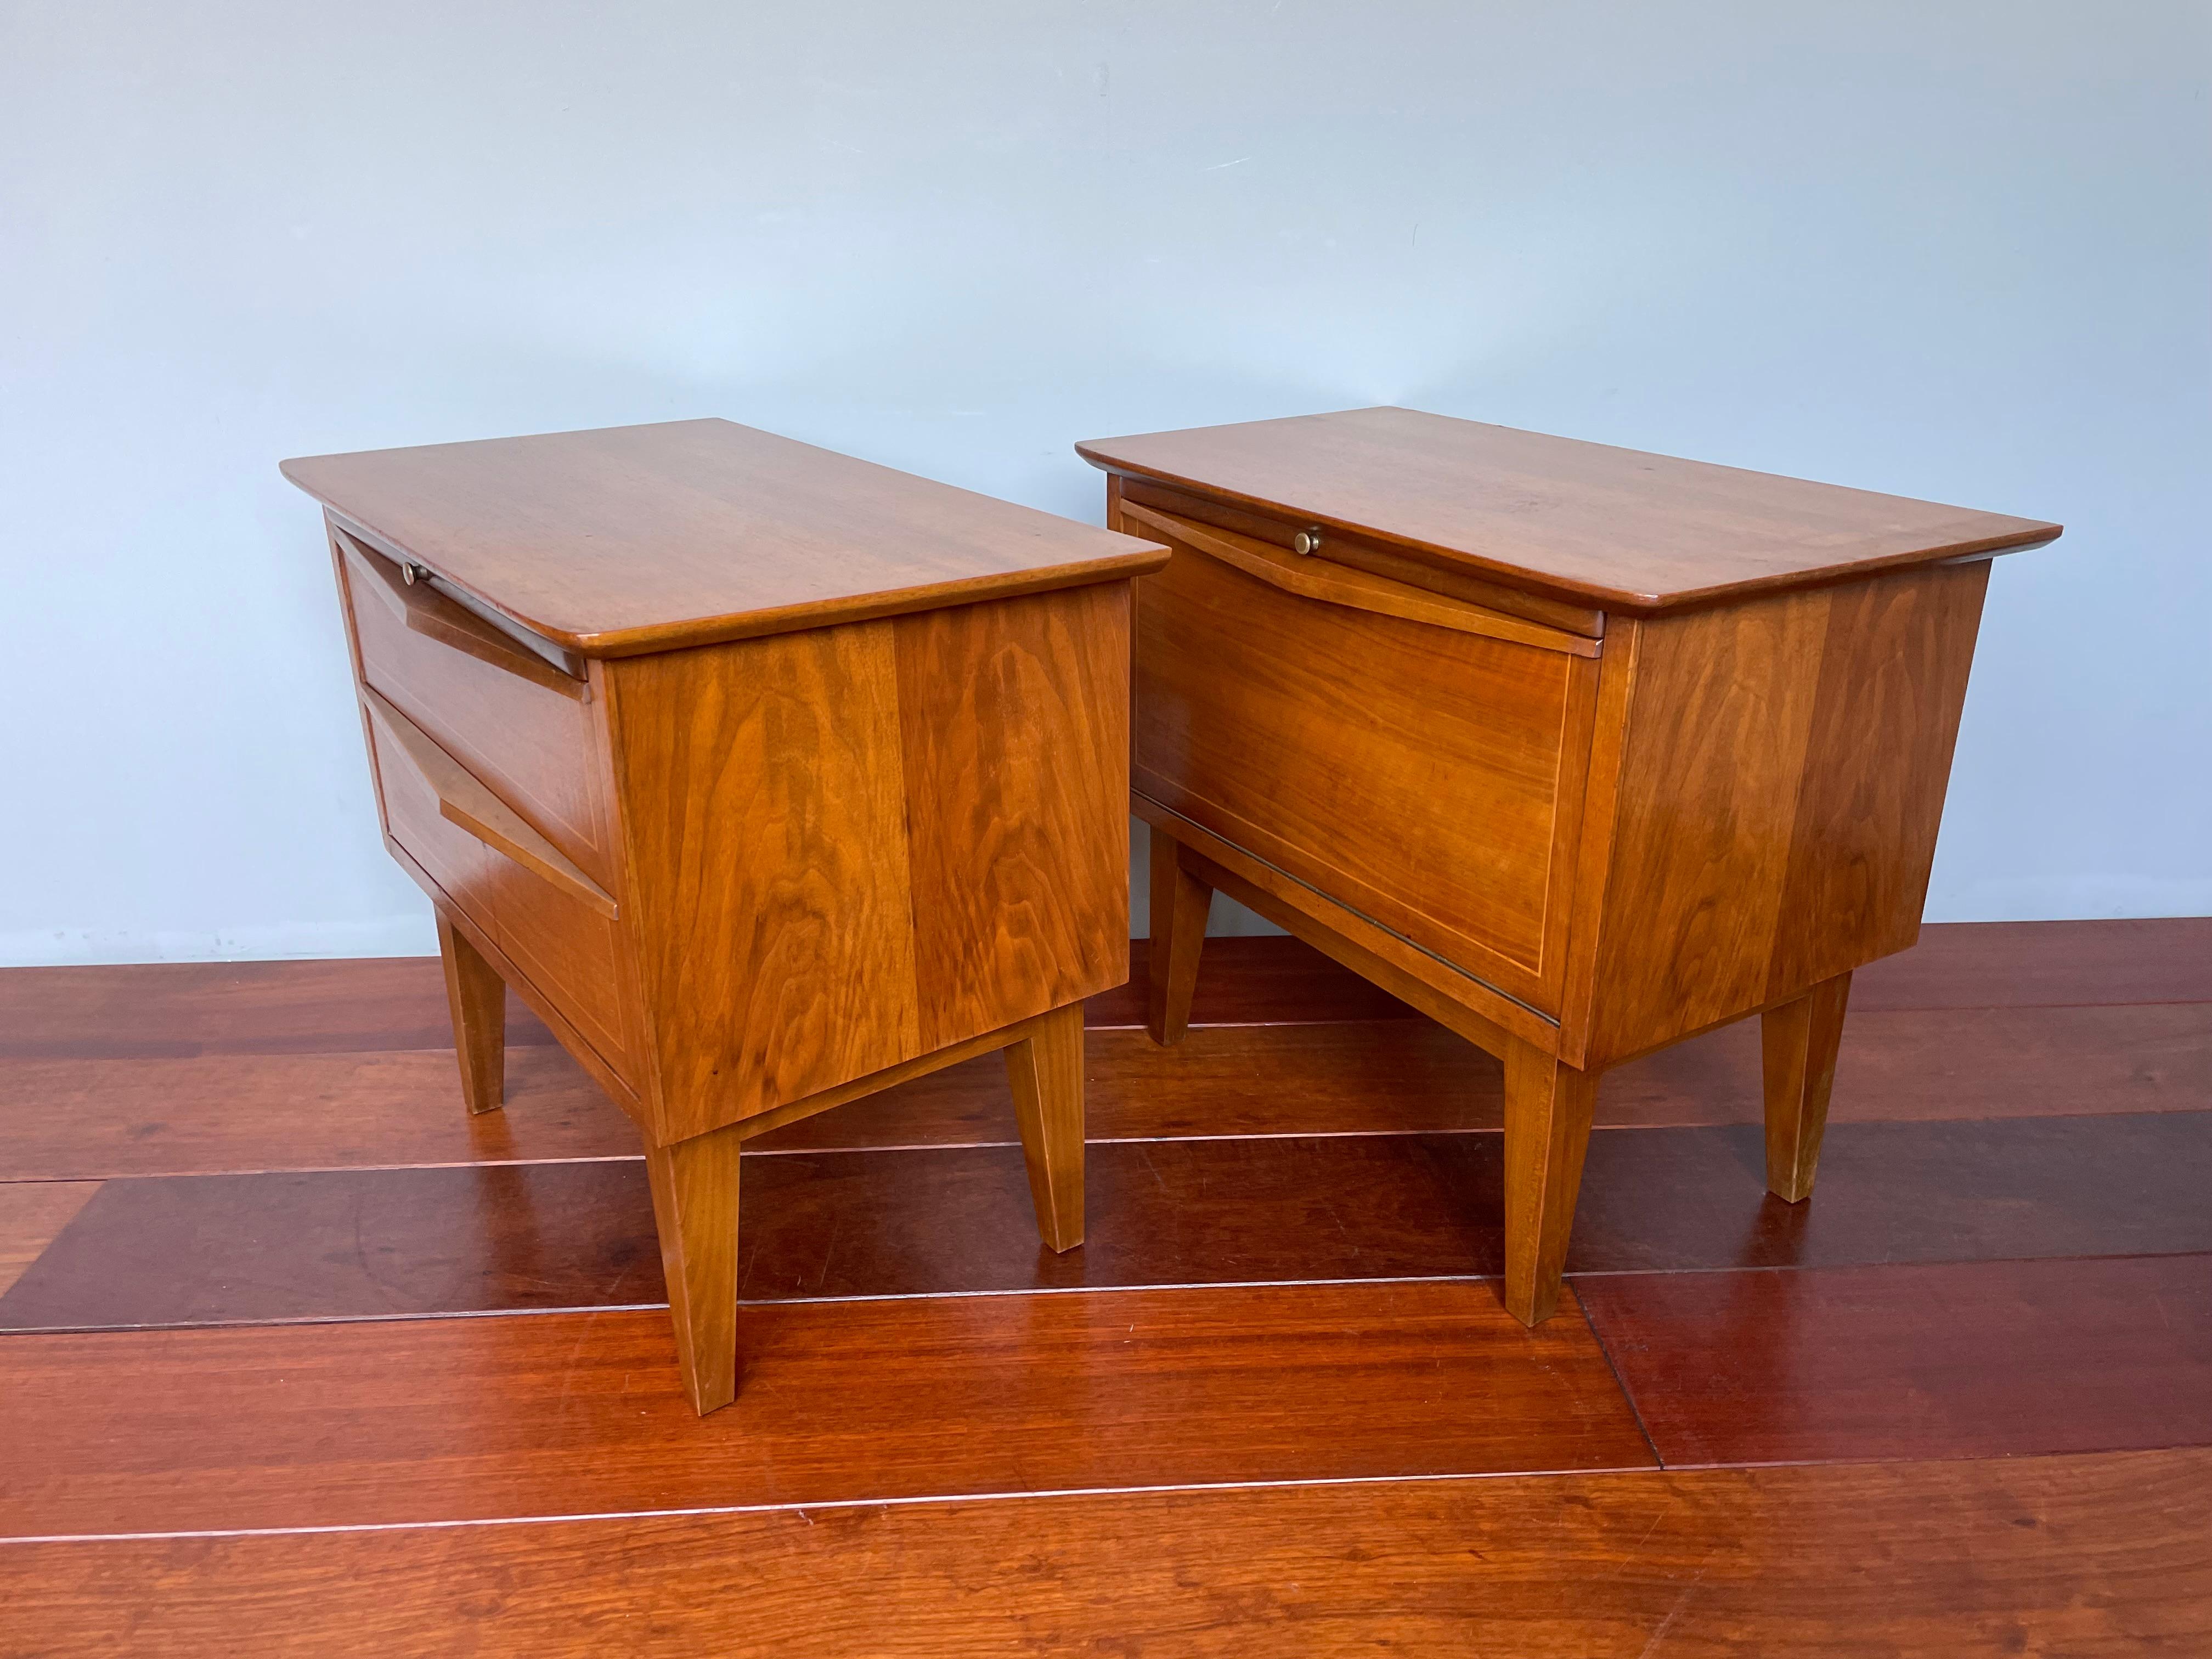 Timeless, mid twentieth century, finer quality and condition night stands.

We are happy to again have found a beautiful pair of finer quality cabinets from the heydays of the European midcentury era. The combination of the stylish lines in the